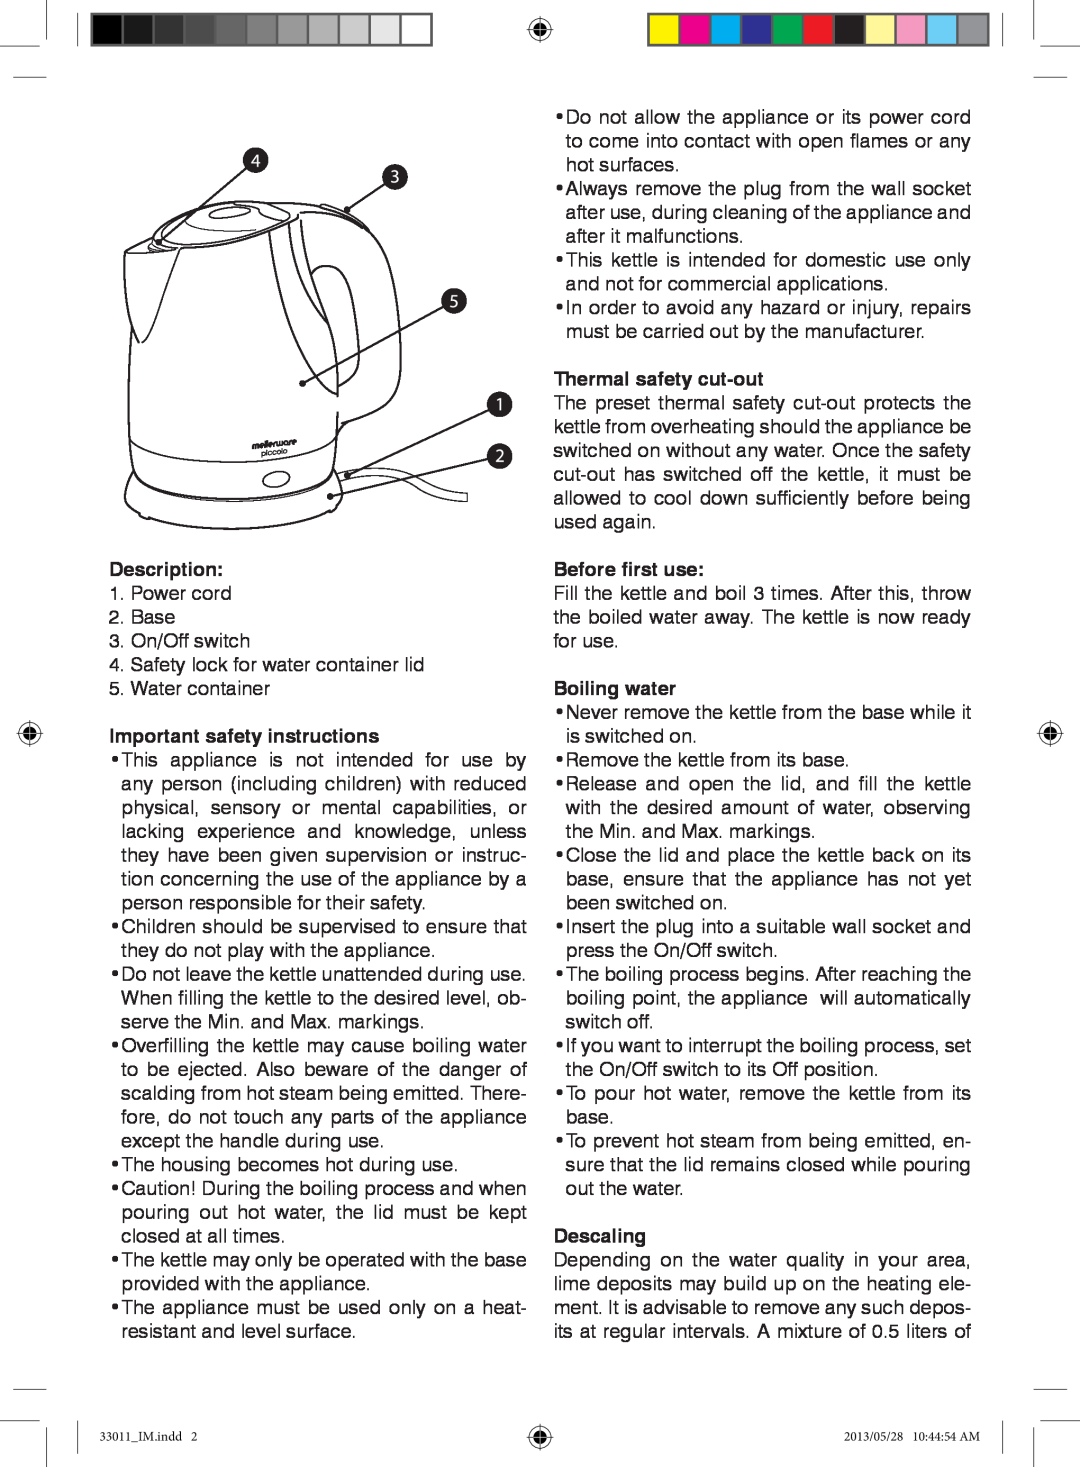 Mellerware 33011 manual Description, Important safety instructions, Thermal safety cut-out, Before first use, Boiling water 